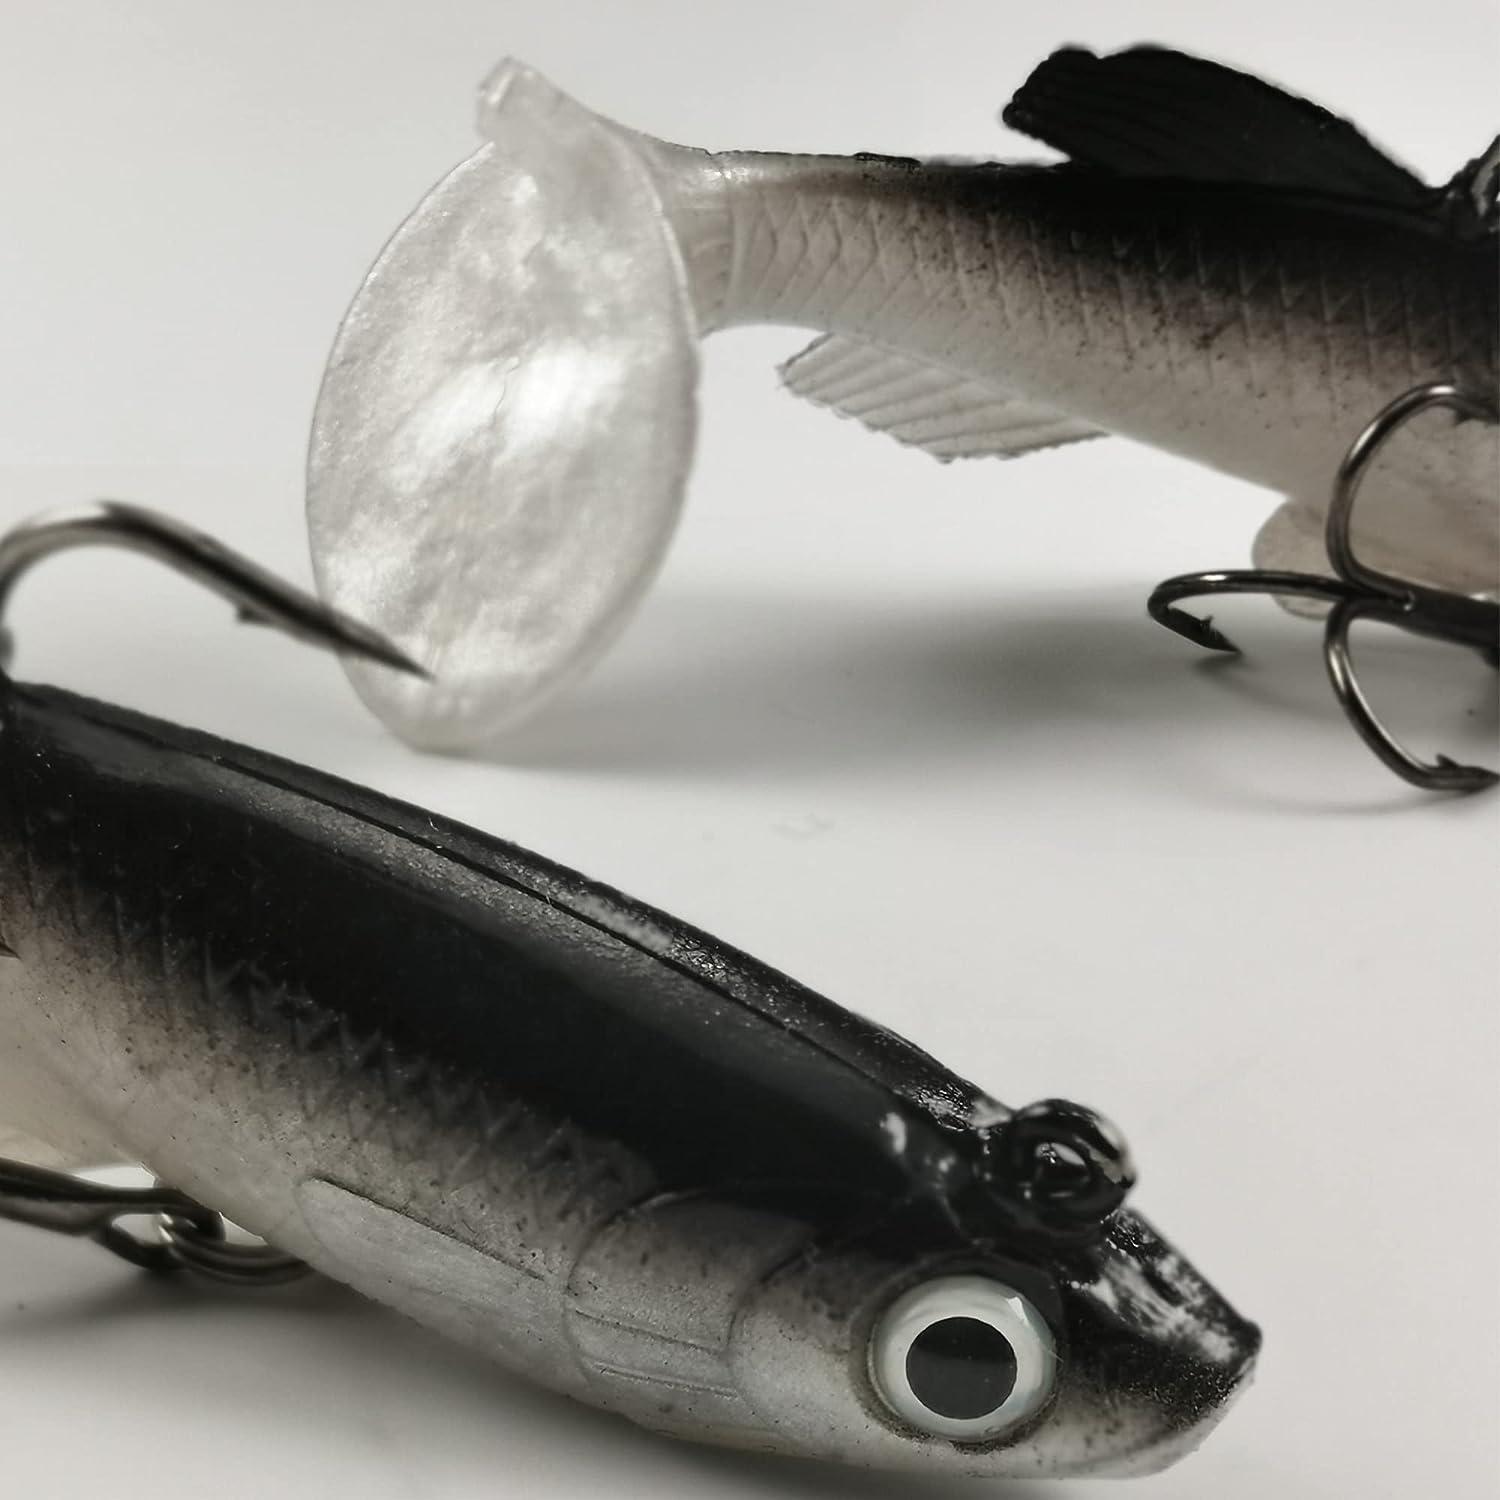 Pre-Rigged Jig Head Fishing Lures, Weedless Bass Baits for Freshwater and  Saltwater 